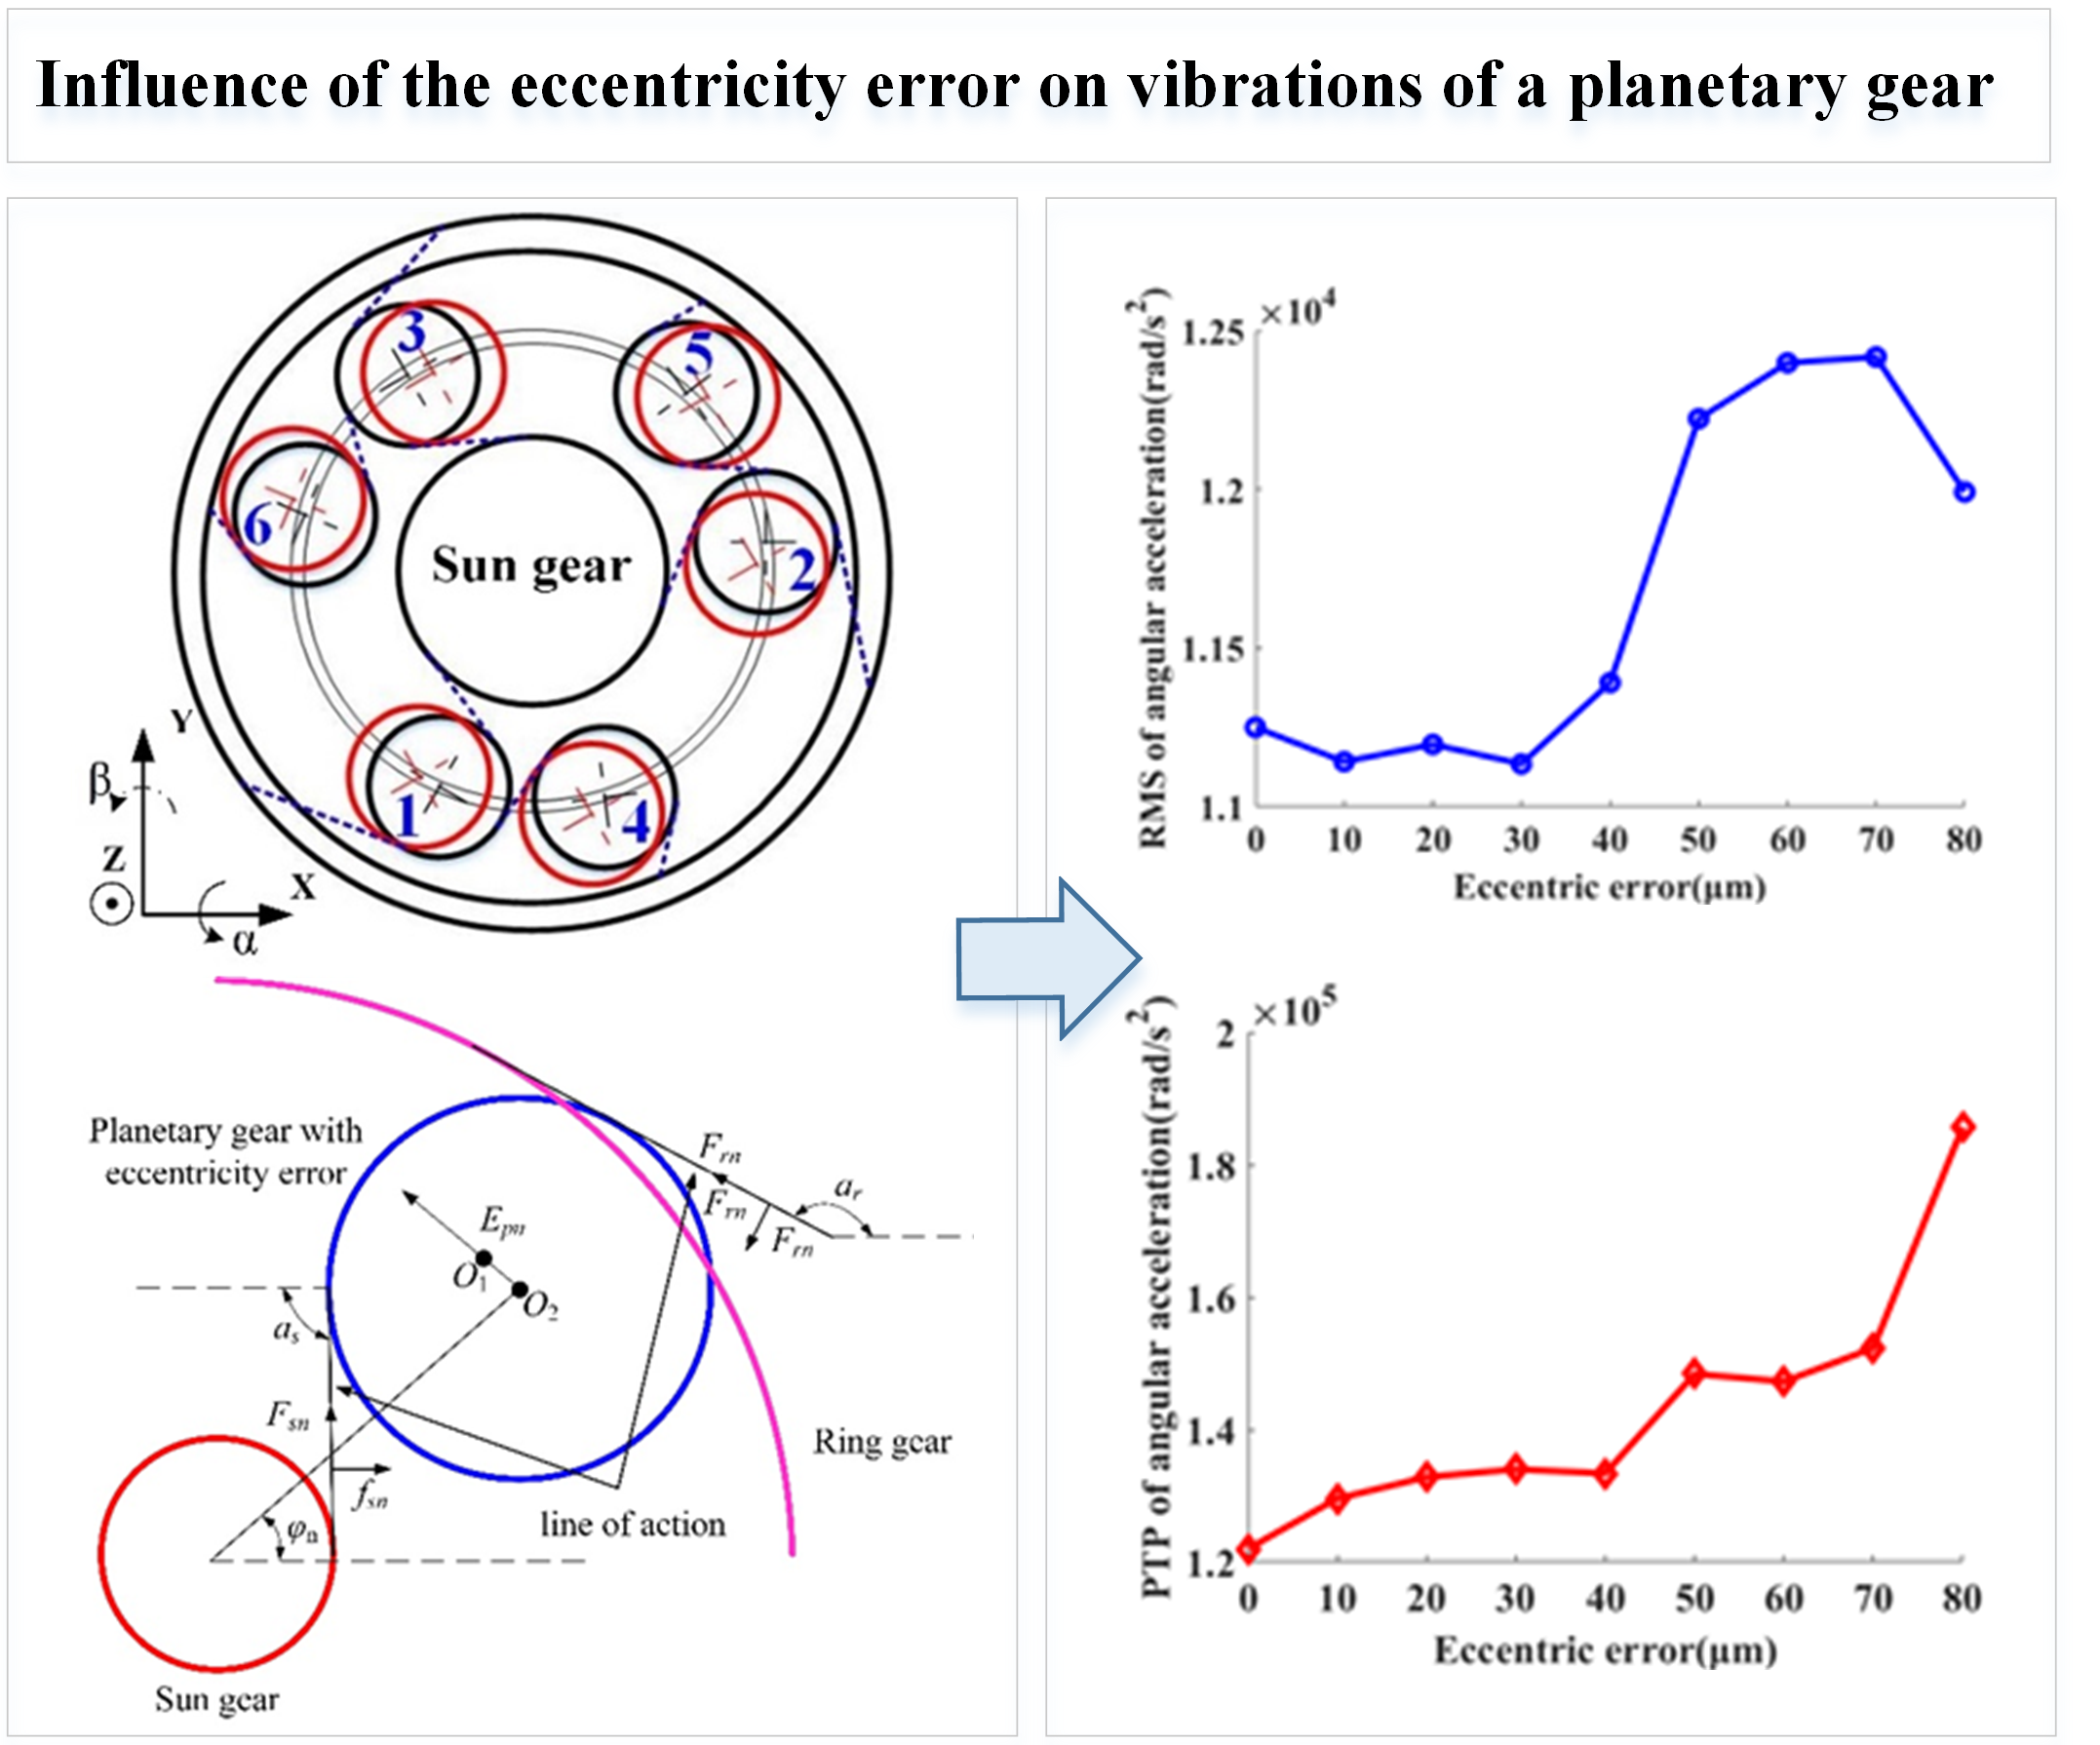 Influence of the eccentricity error on the vibrations of a planetary gear